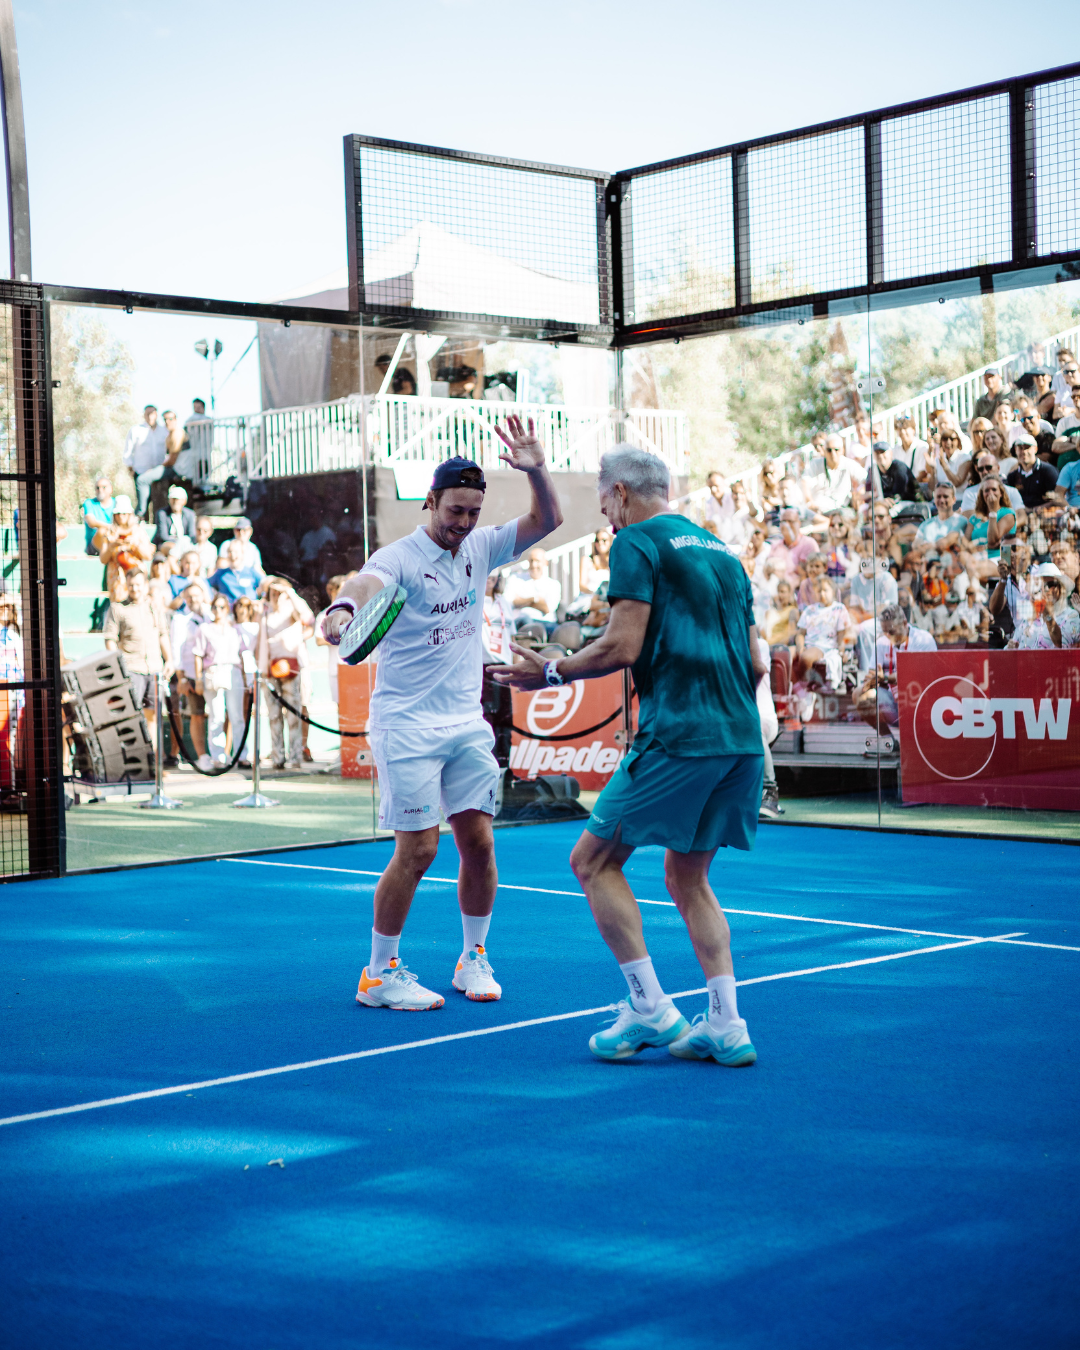 Lamperti and Bueno on central court in Knokke